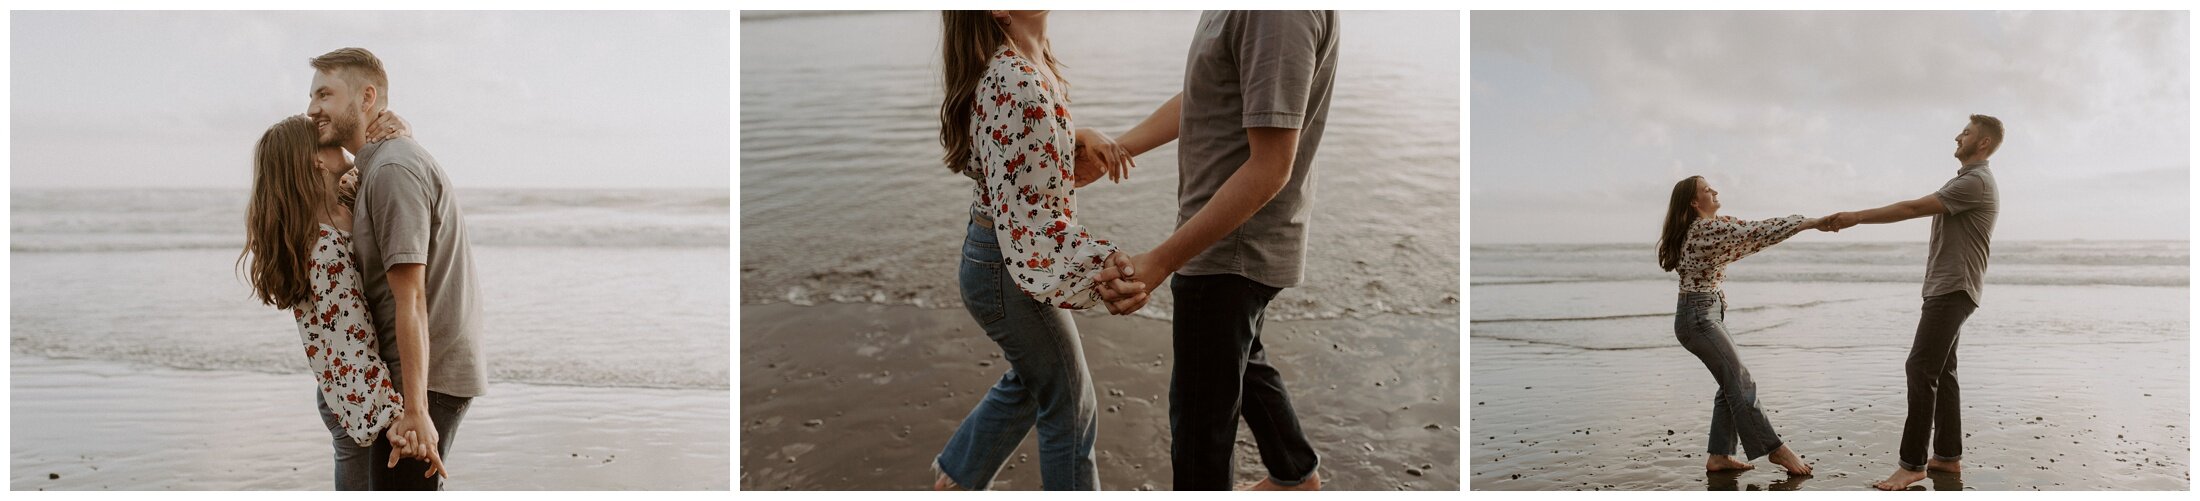 Ruby Beach Engagement Session by Jessica Heron Images_0004.jpg